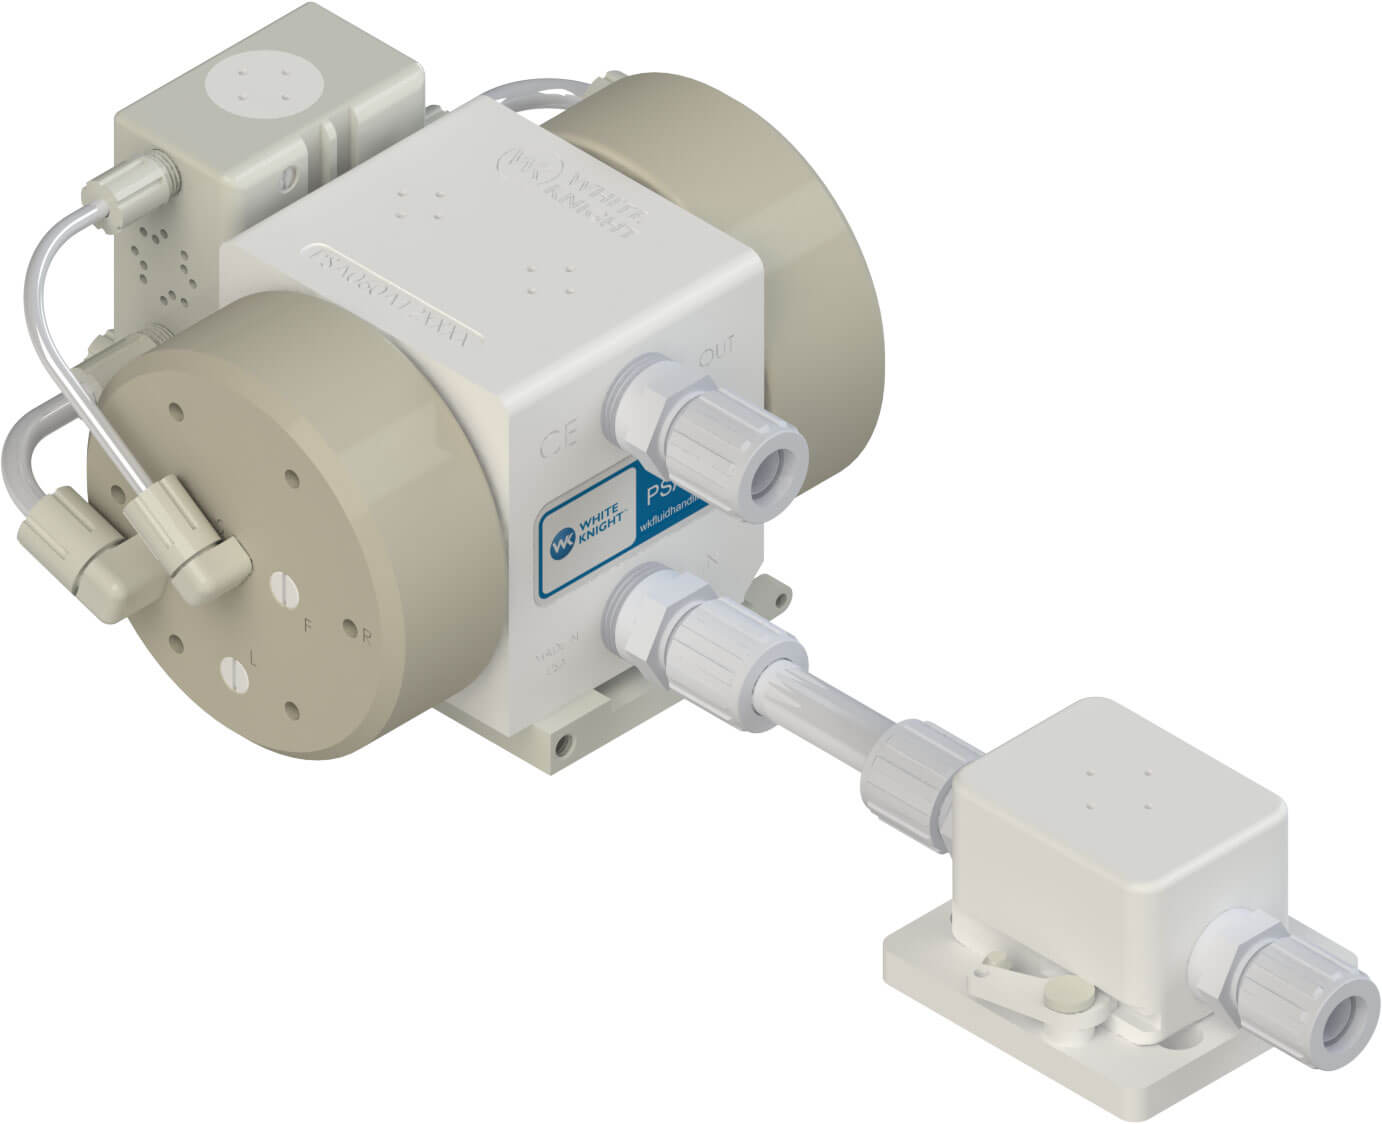 PSA060 Pump with FD12-S-BF12F12 In-Line Pre-Filter Catcher